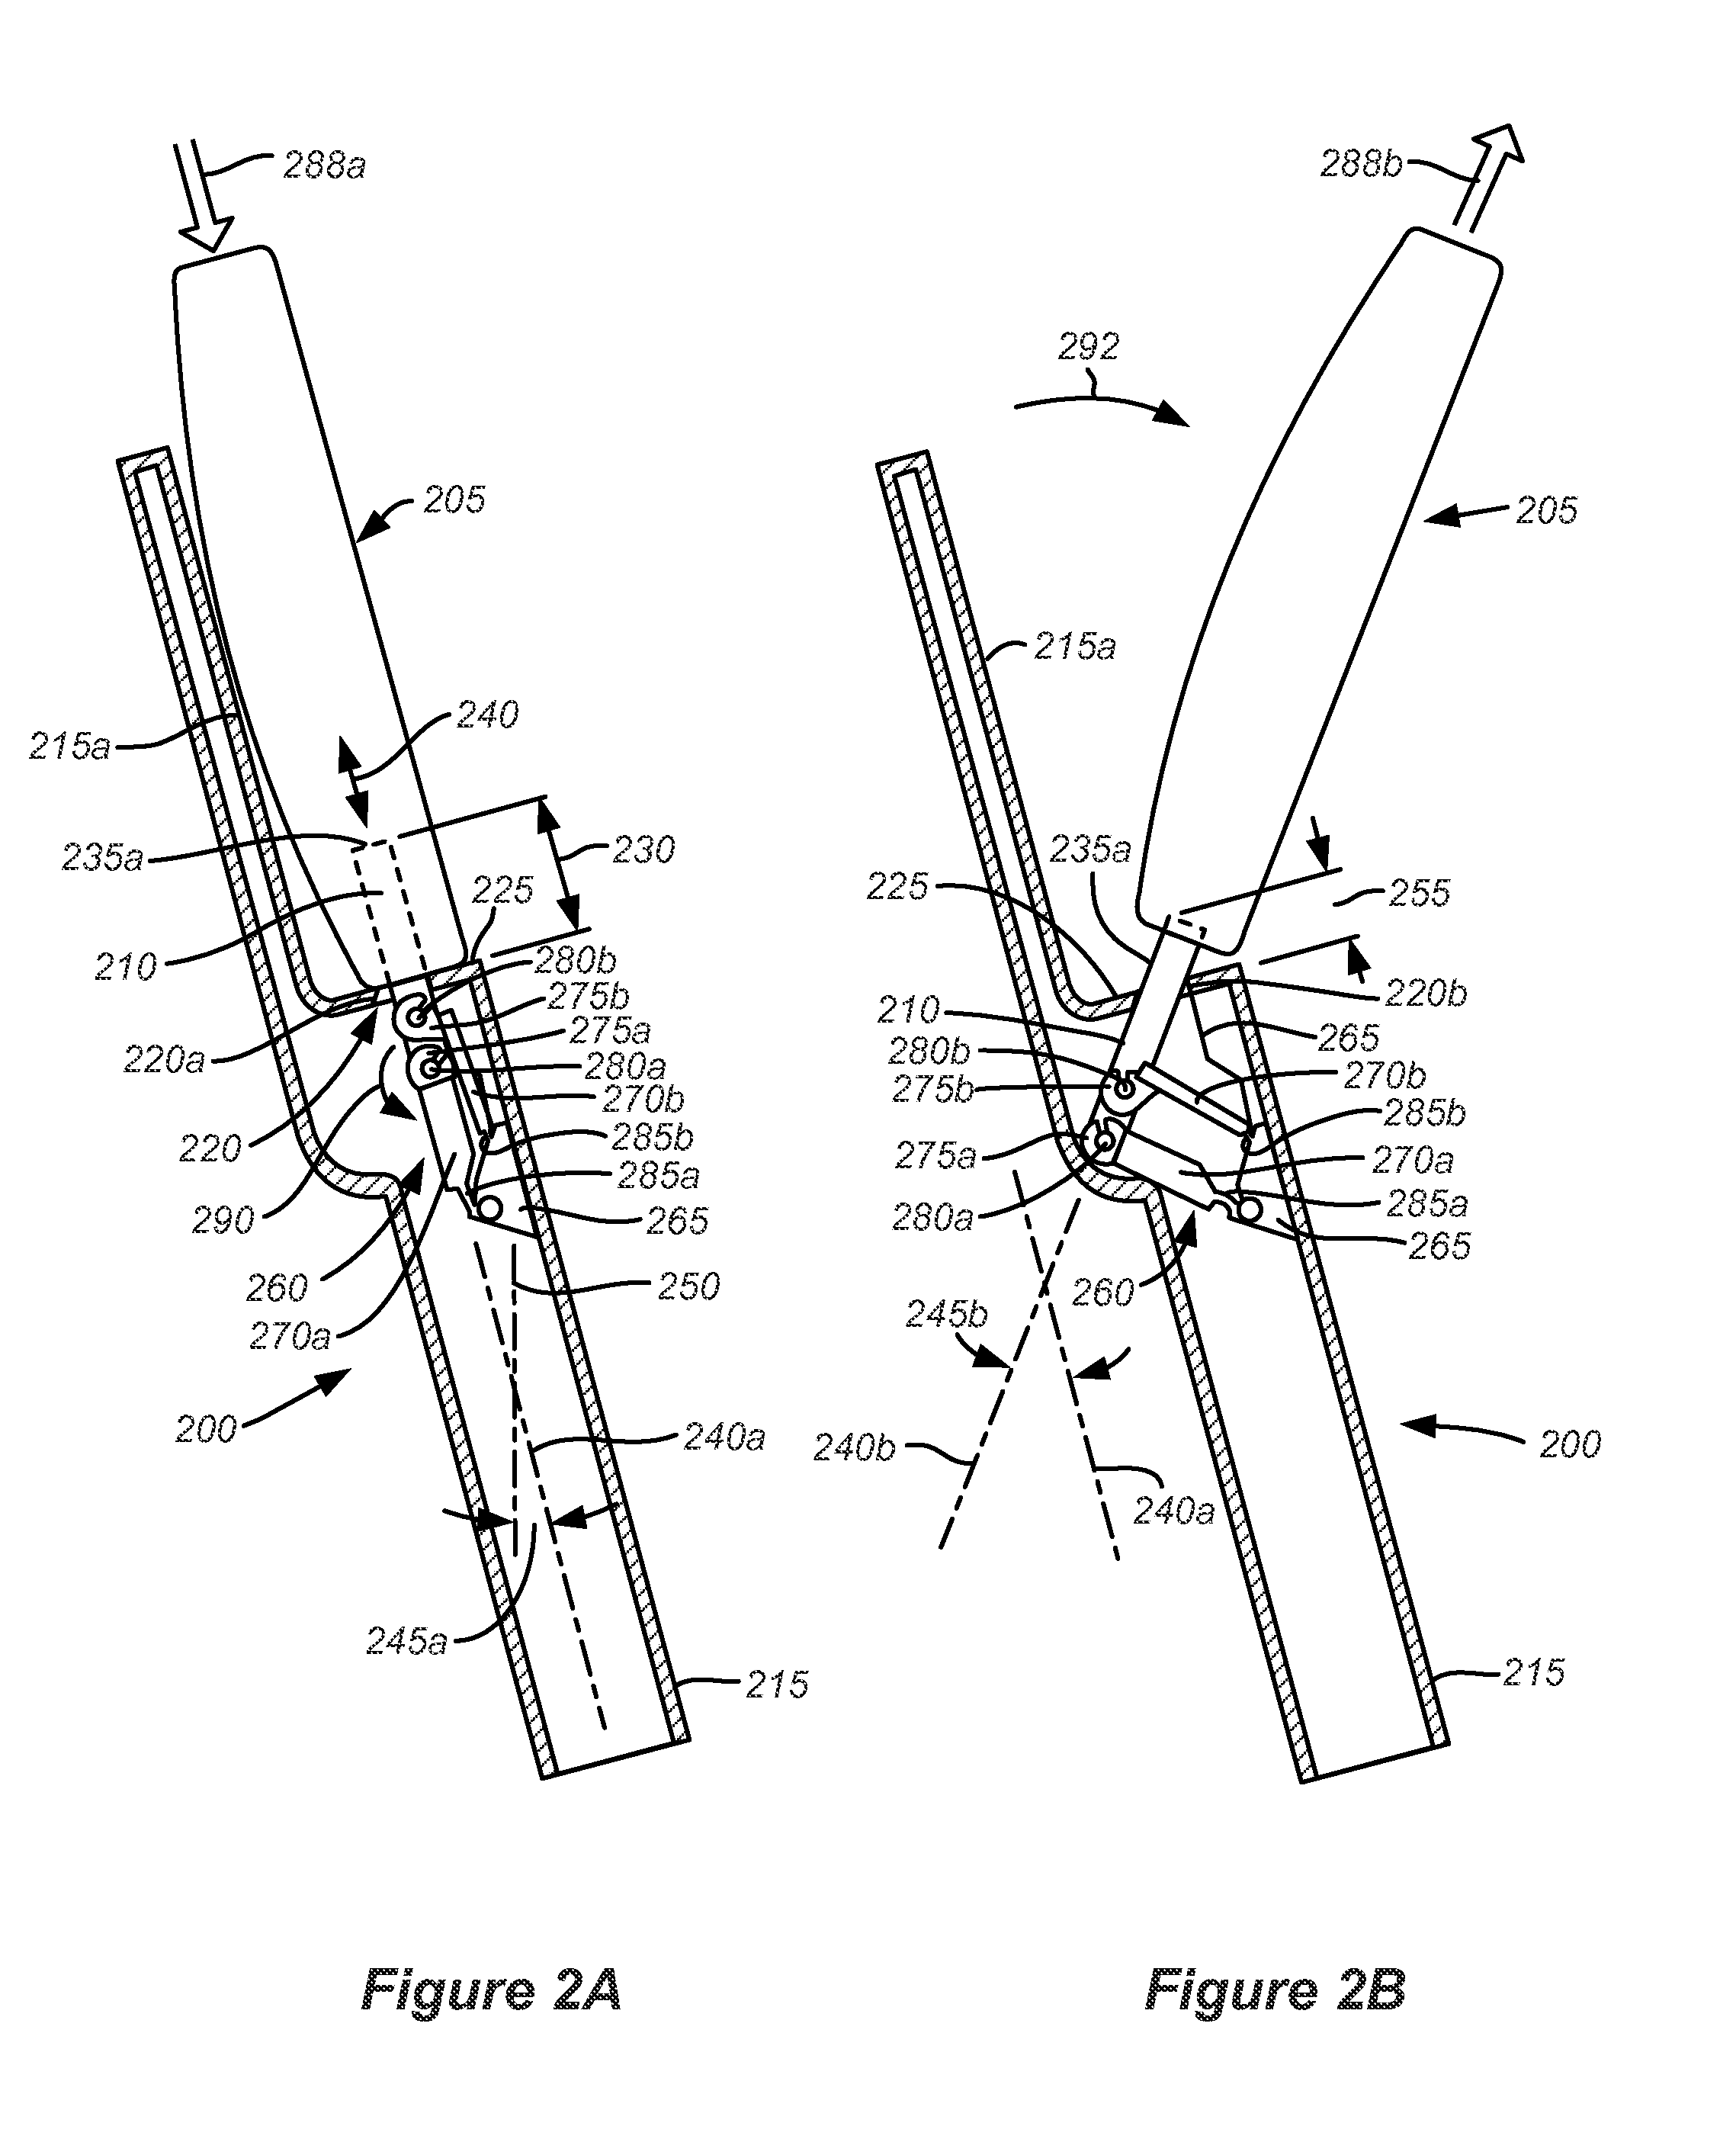 Self-retracting connector for docking device